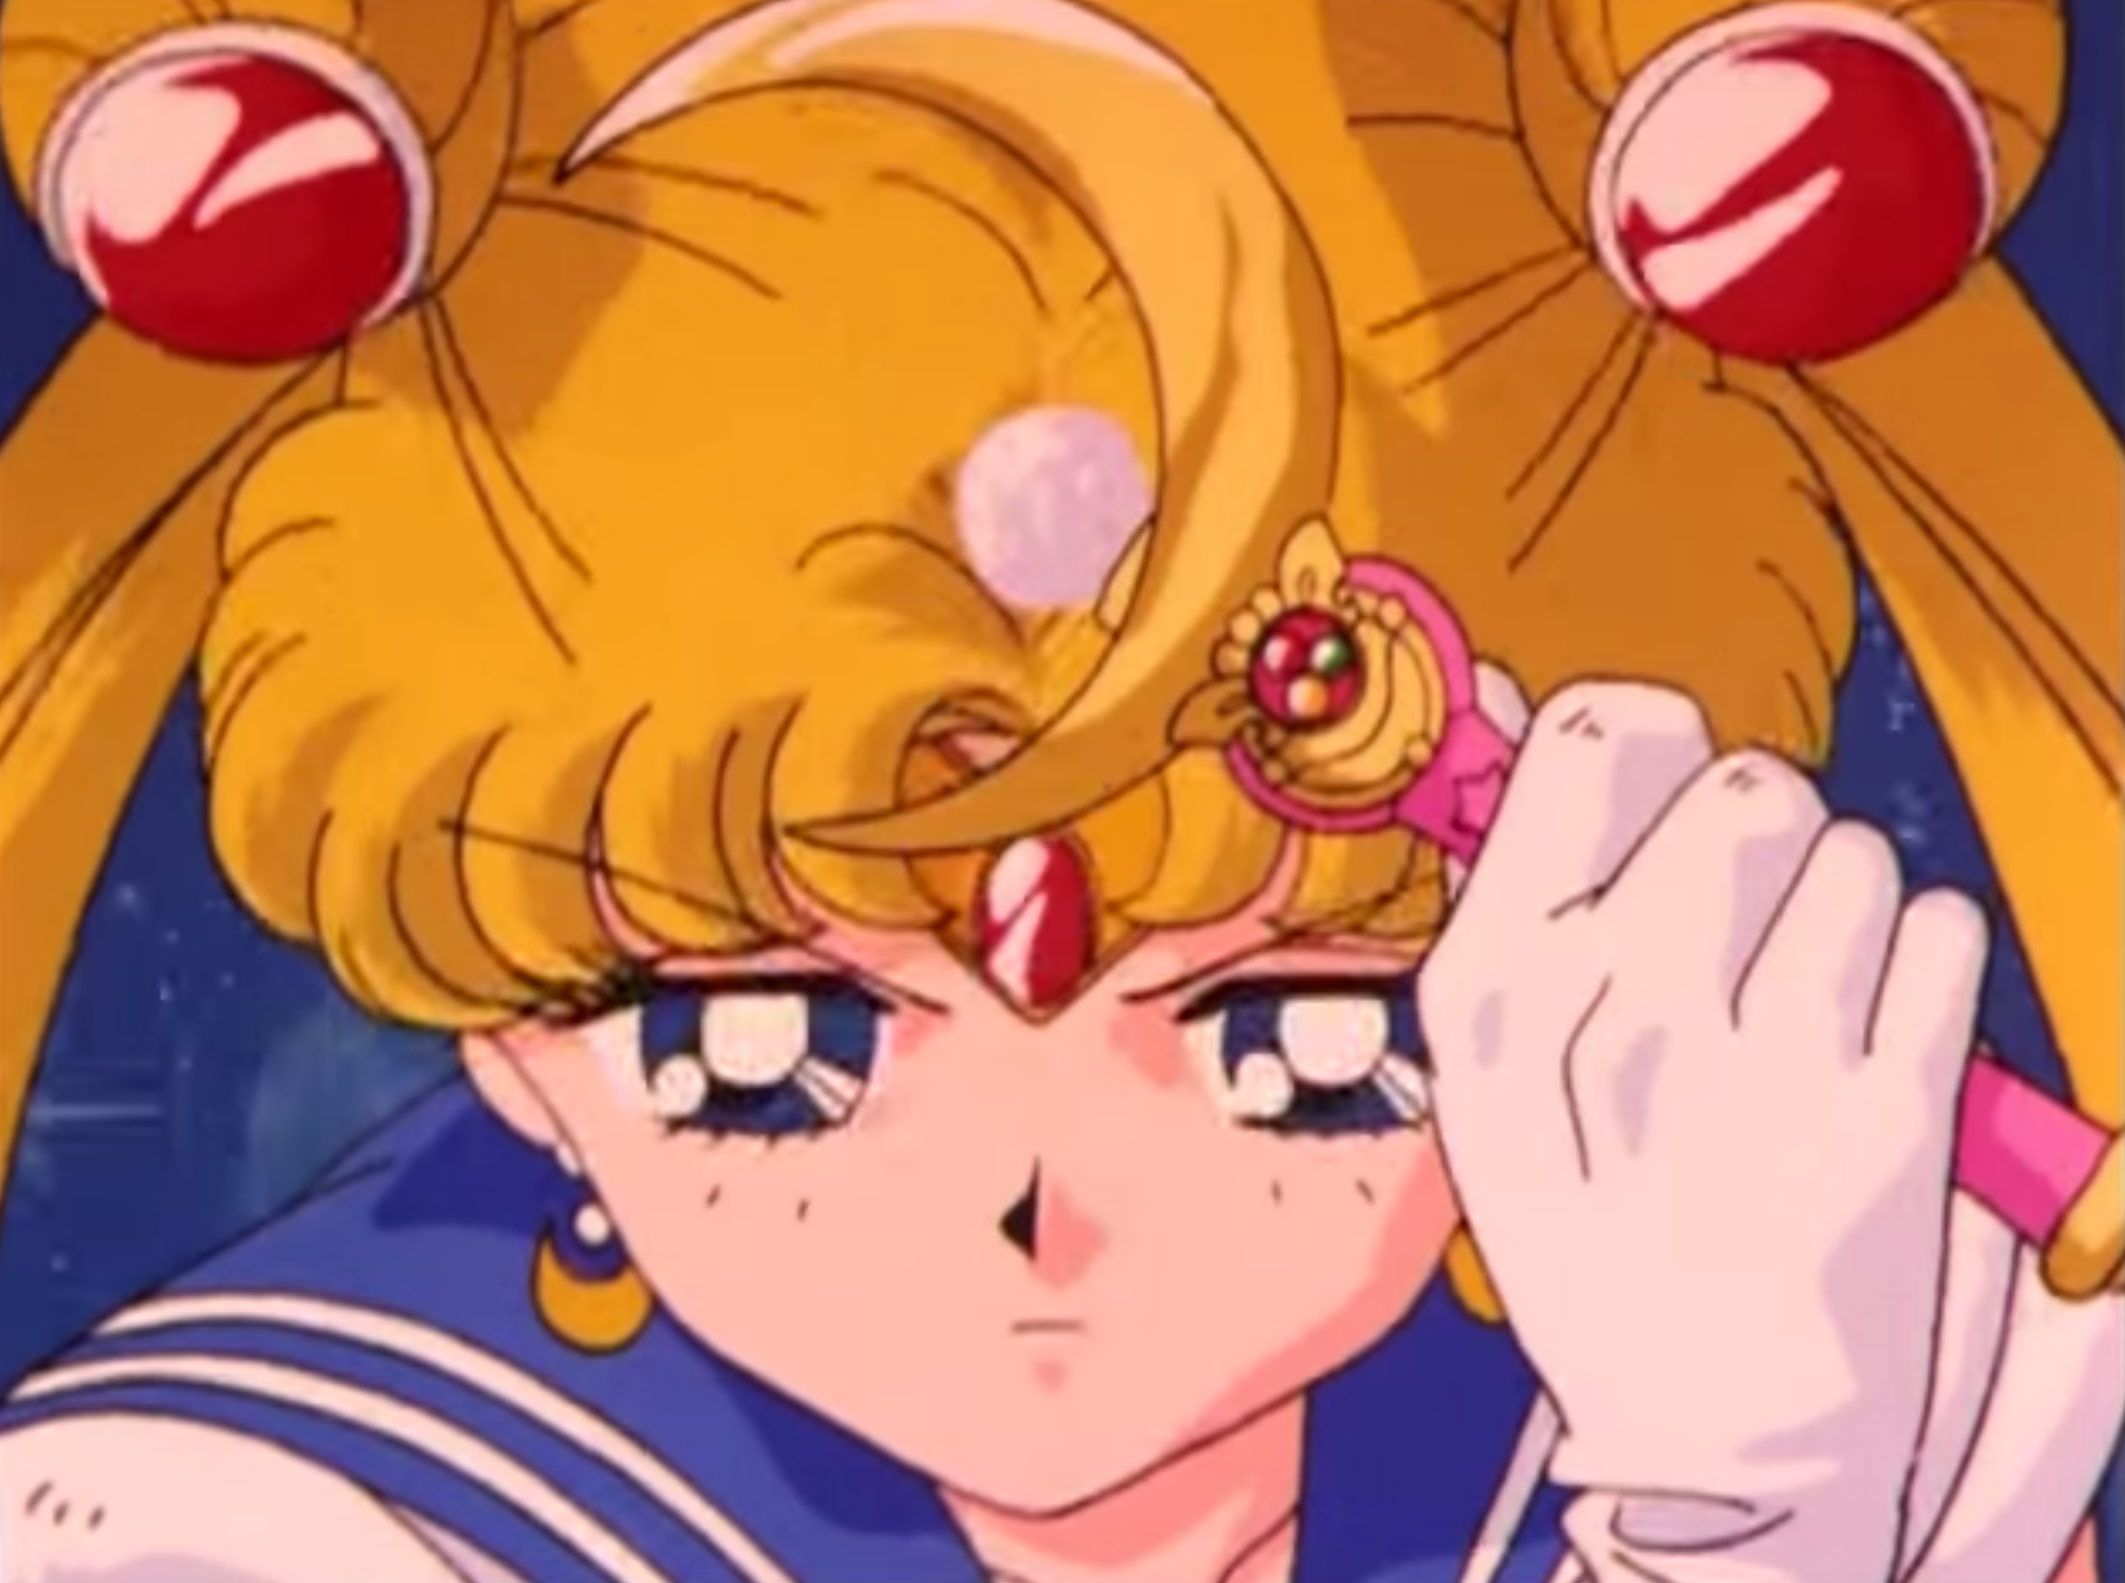 Every Sailor Moon Weapon, Ranked by Emotional Carnage